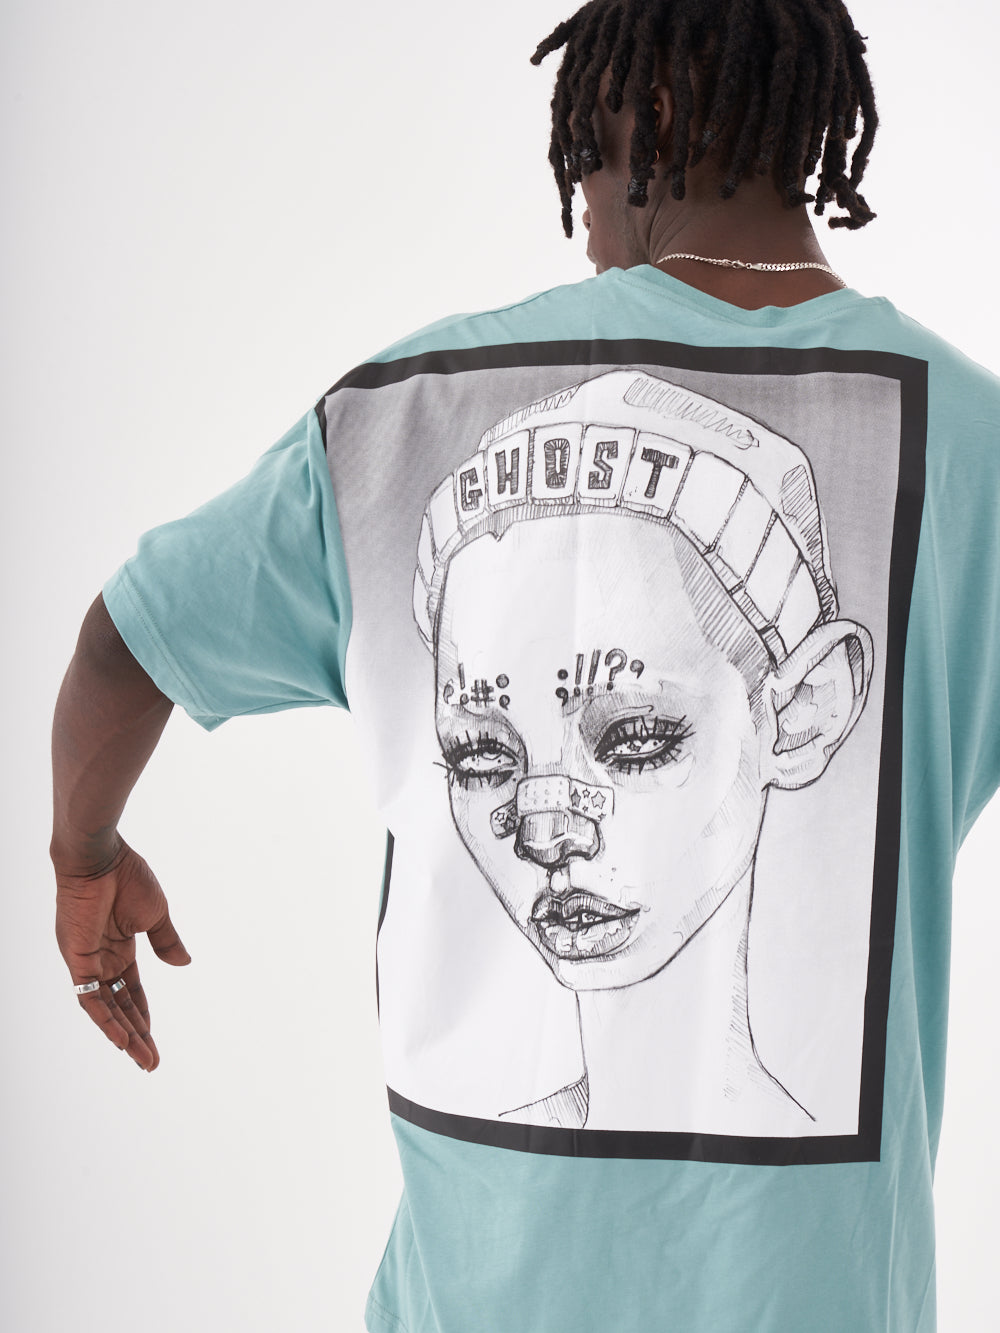 The back of a man wearing a GHOST T-SHIRT with a drawing on it.